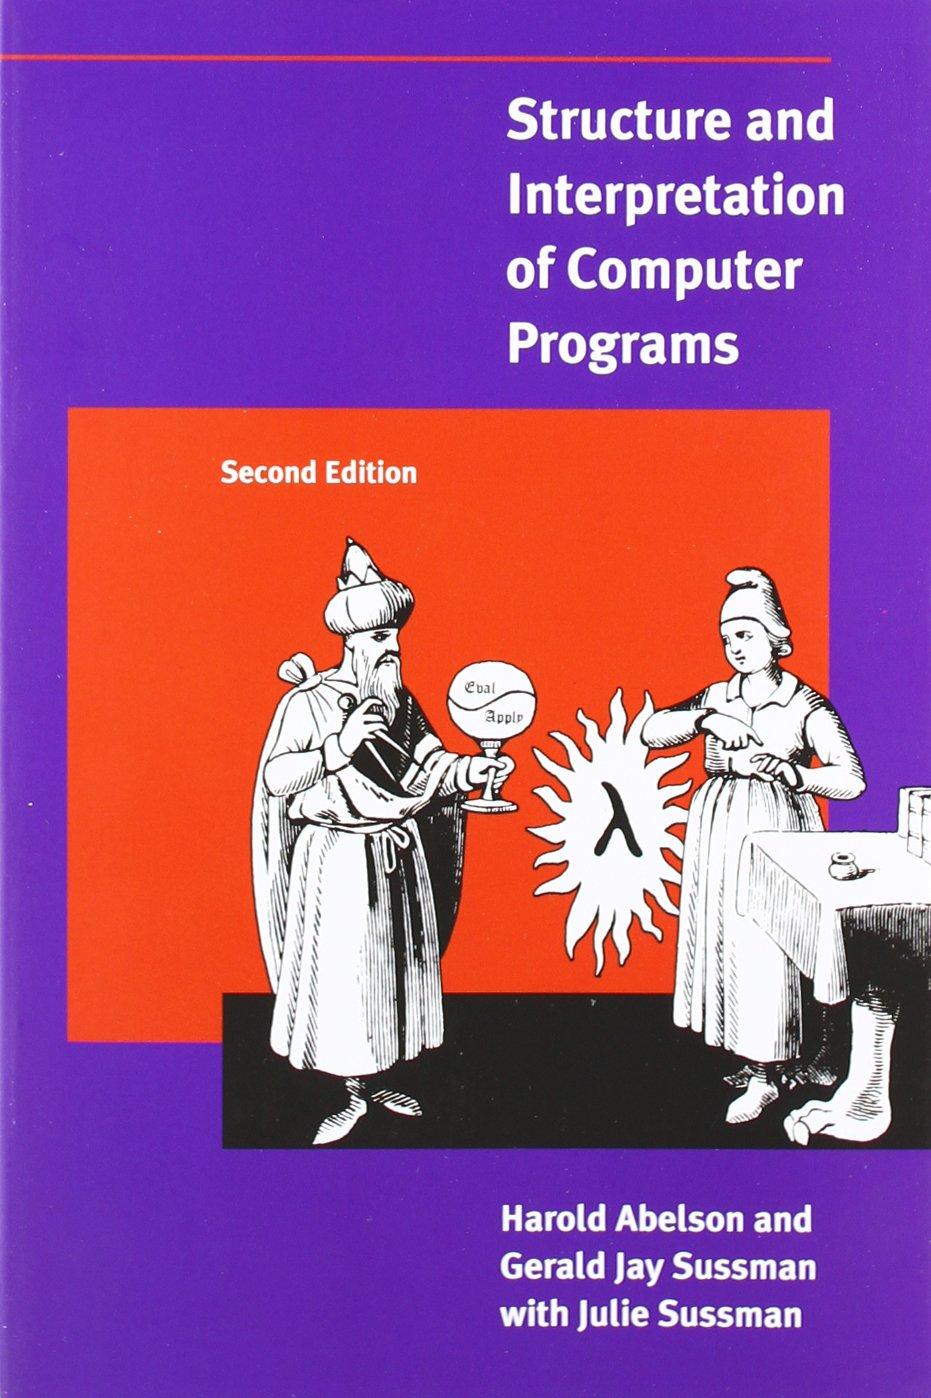 functional programming resources Scheme (a modern dialect of Lisp) impure FP with an emphasis on metaprogramming and linguistic abstraction good for prototyping new language semantics the best book